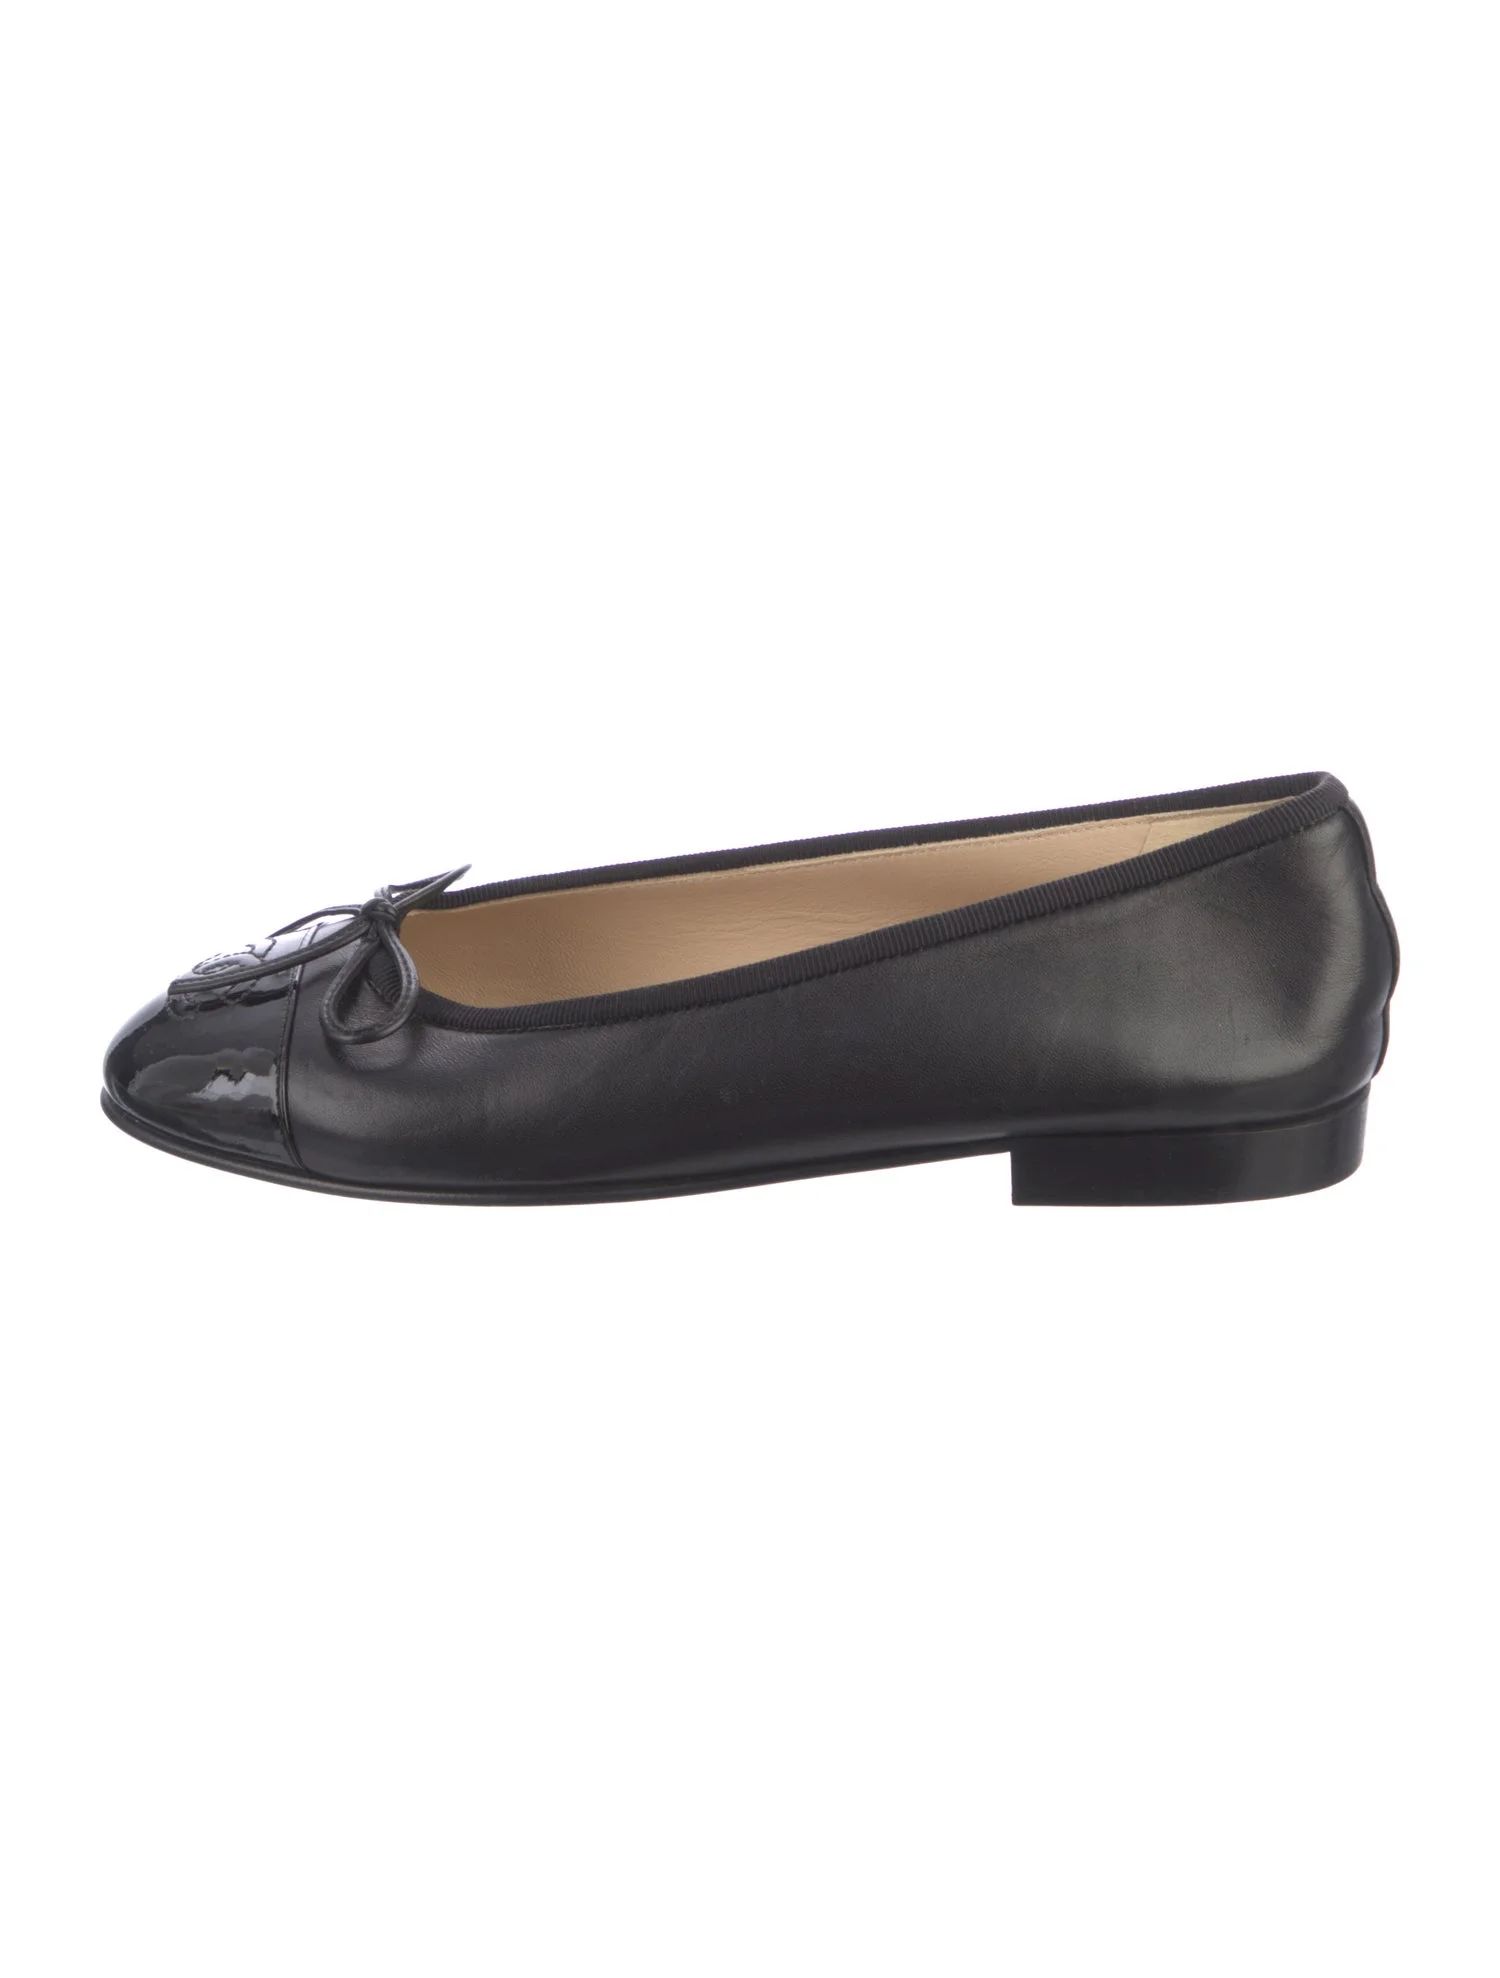 Chanel Patent Leather Ballet Flats | The RealReal